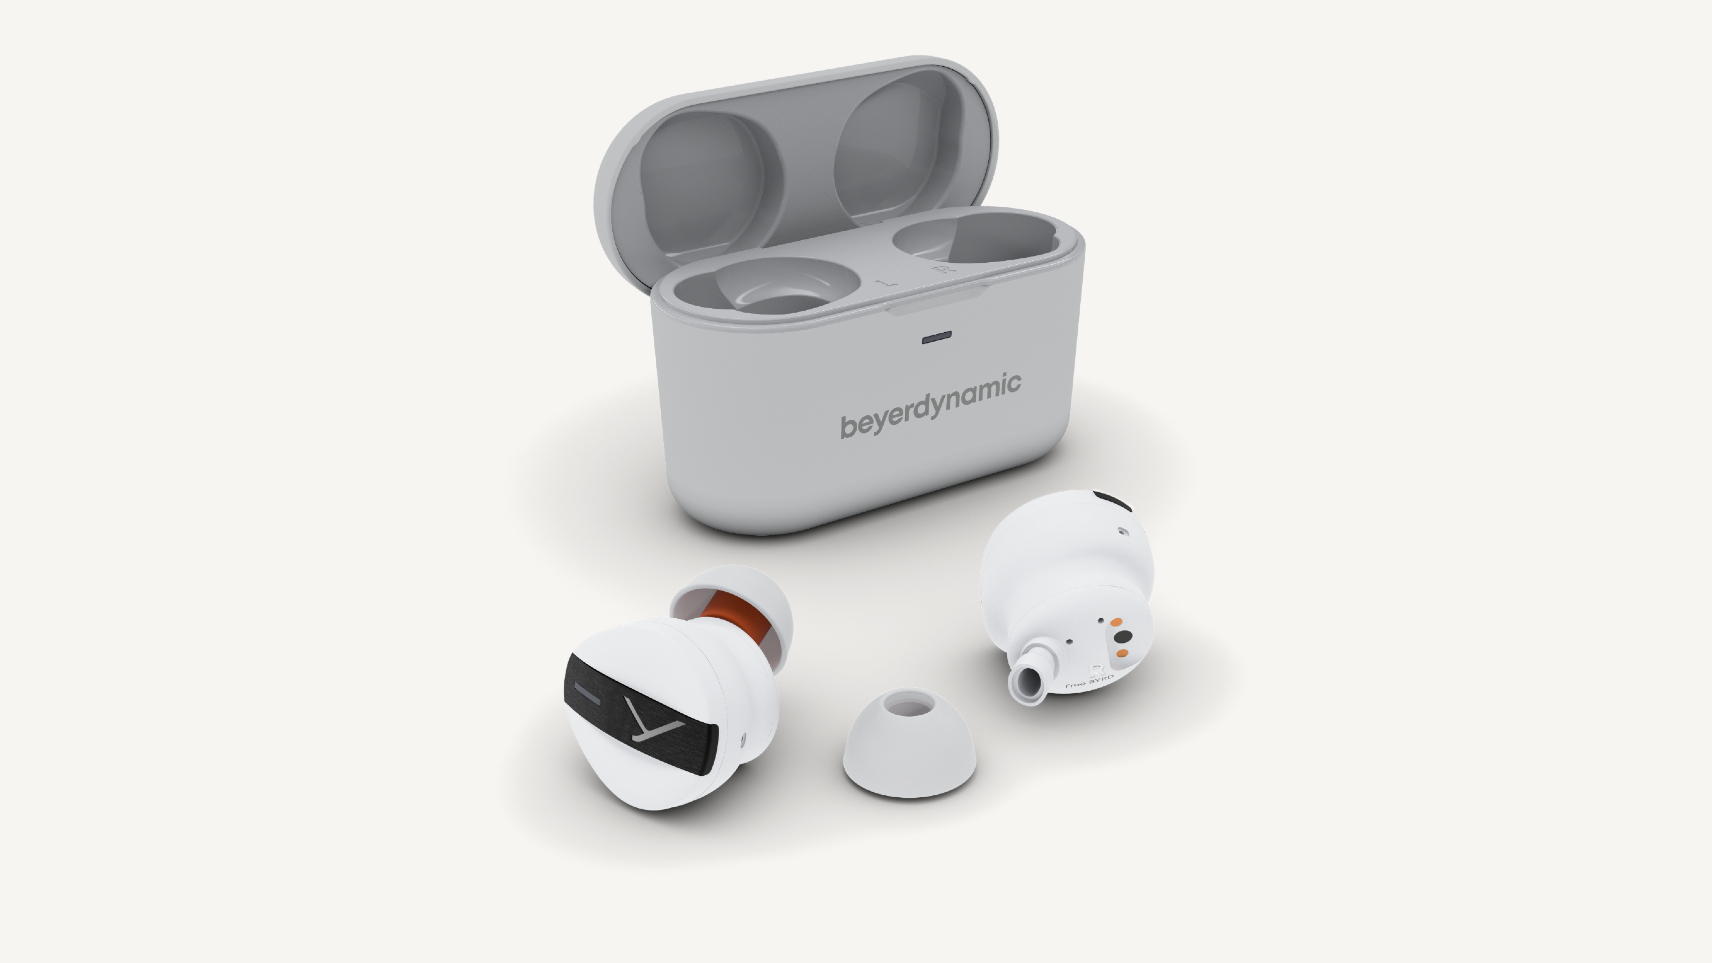 Beyerdynamic Free Byrd earbuds and case on a white background